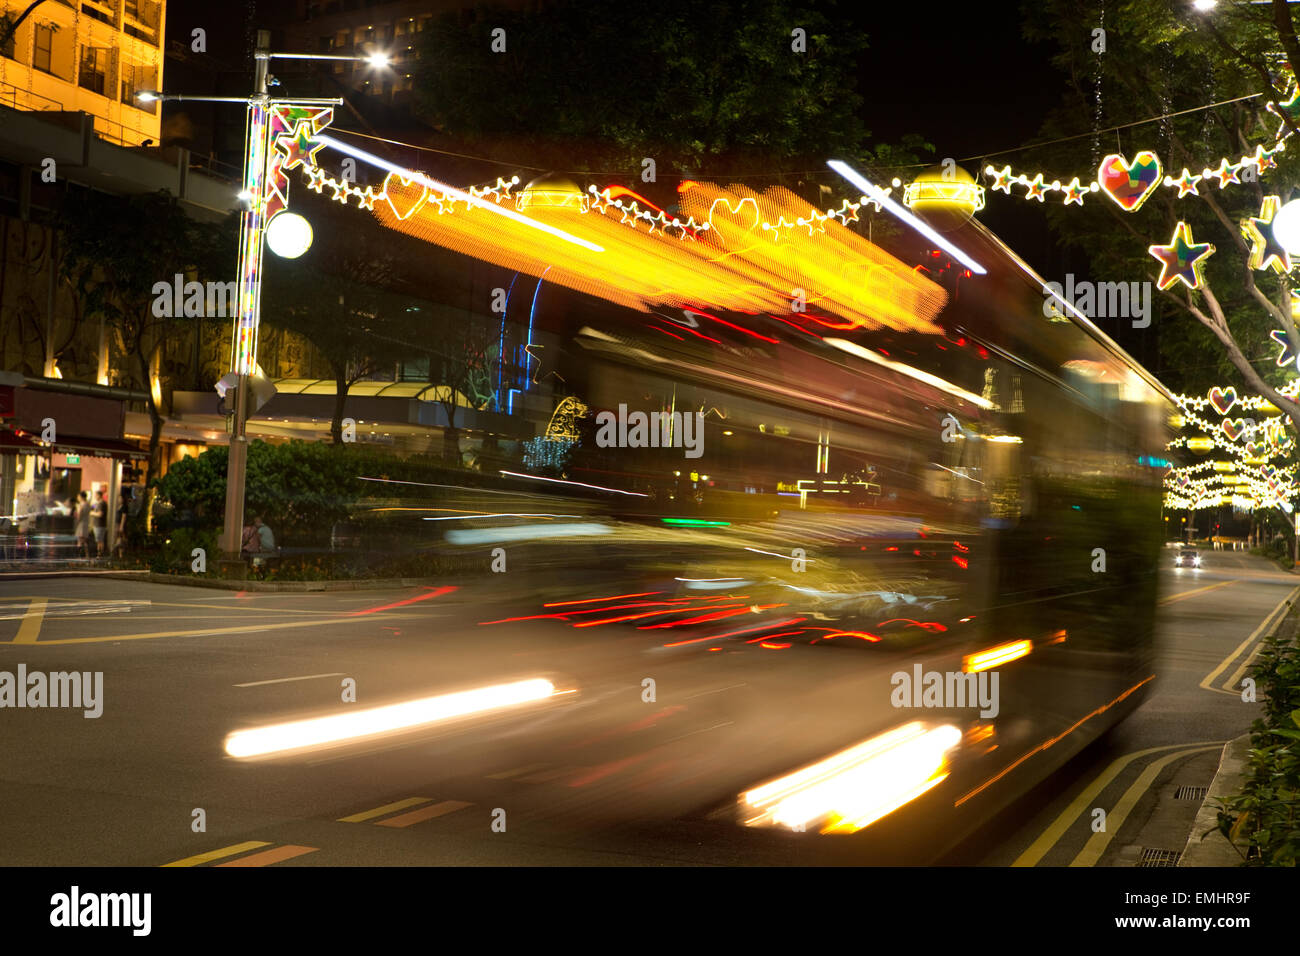 Busy street of Singapore with Christmas lights and decorations Stock Photo